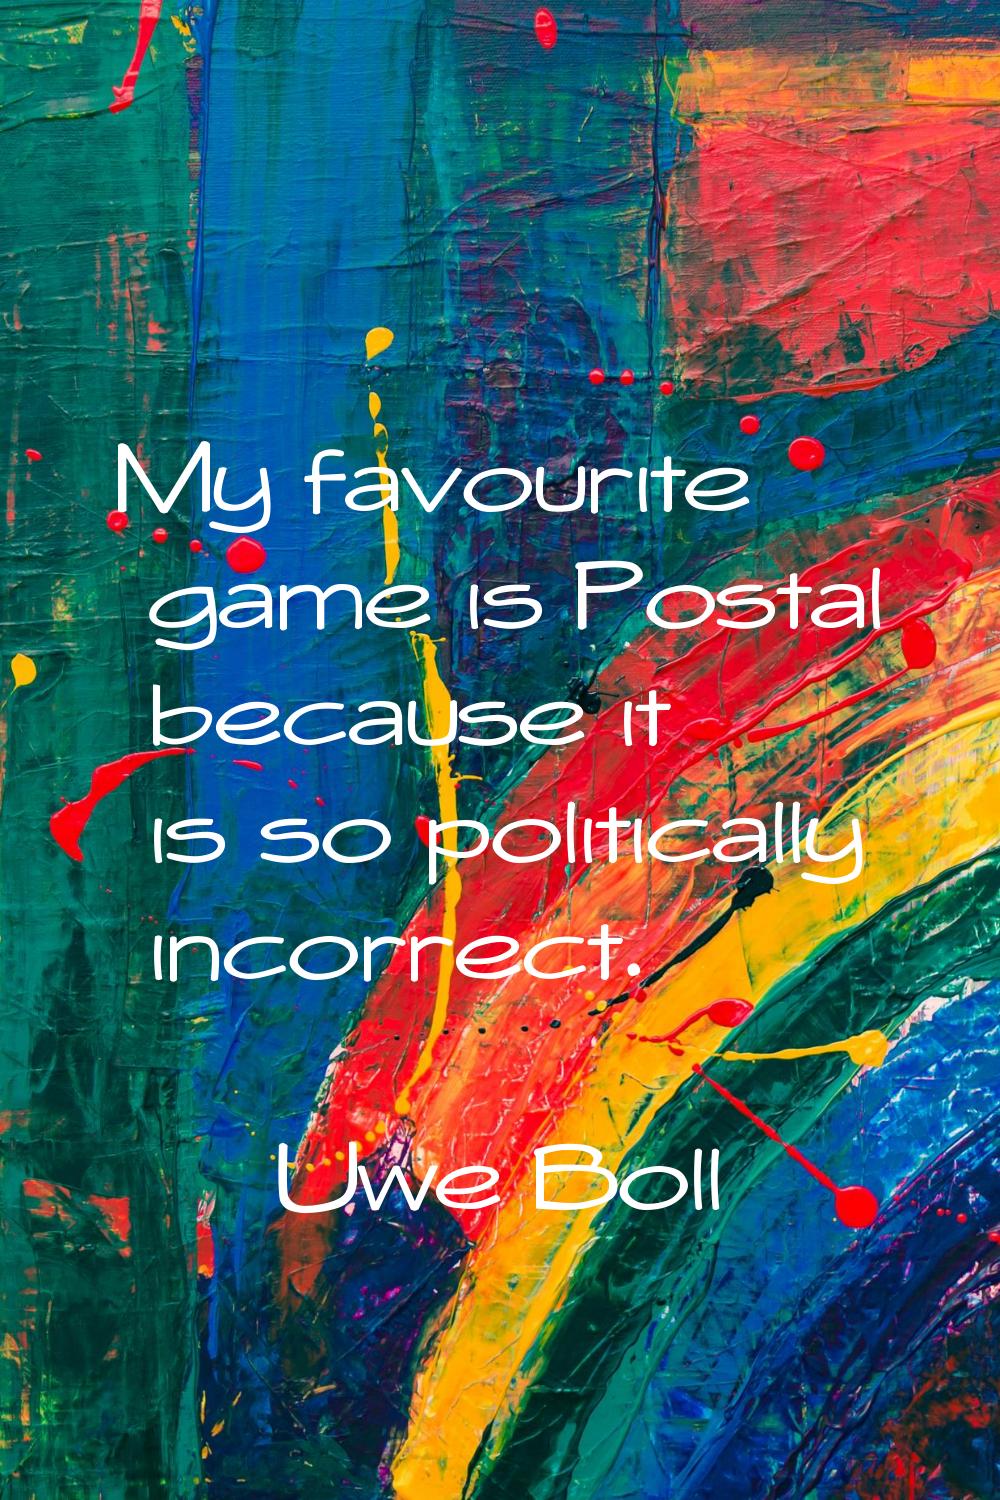 My favourite game is Postal because it is so politically incorrect.